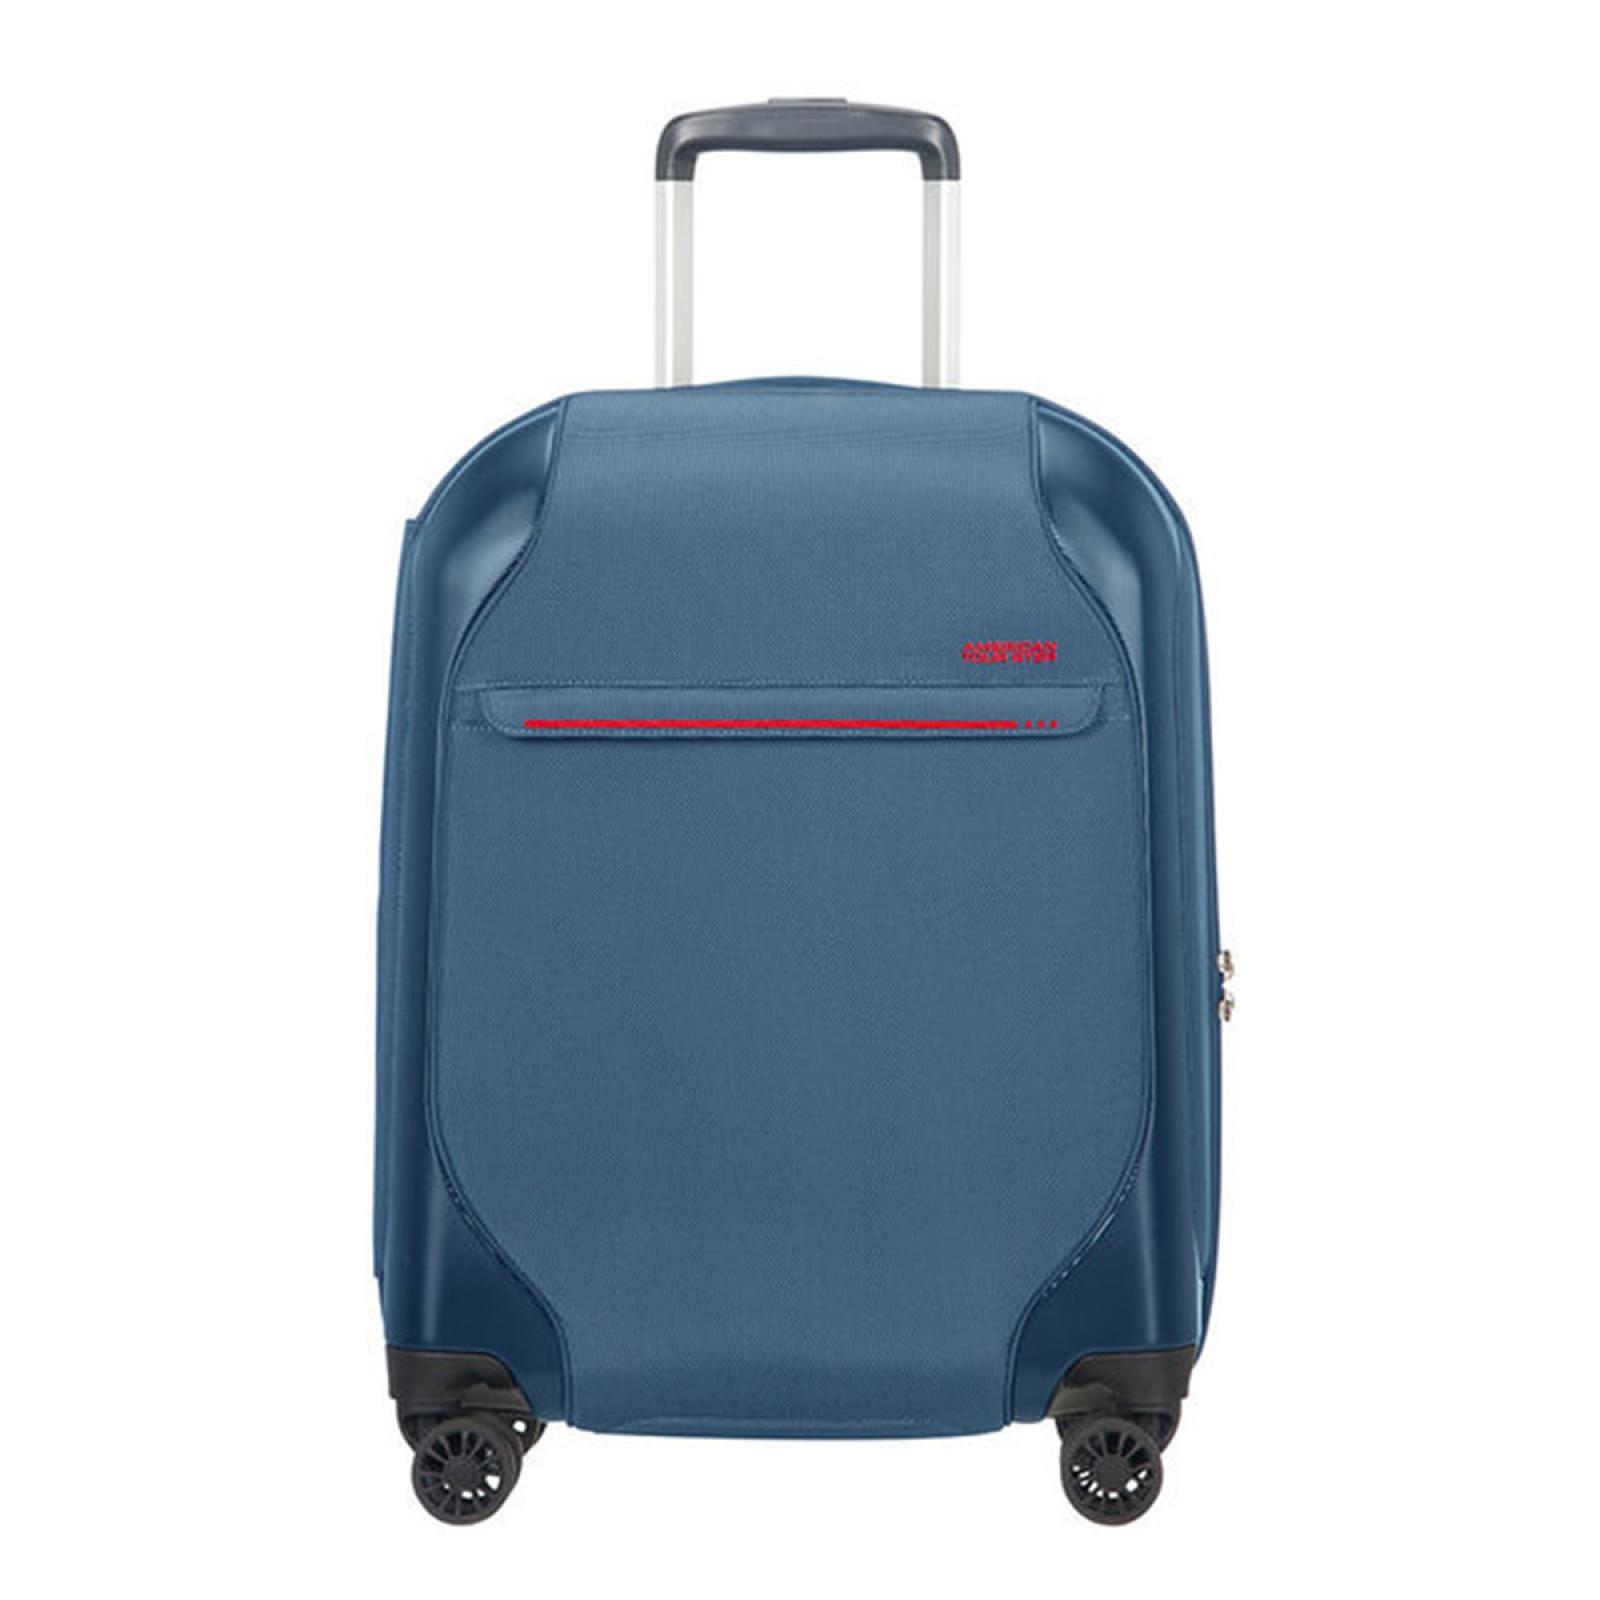 American Tourister Hand Luggage Skyglider Spinner 55 cm - 1